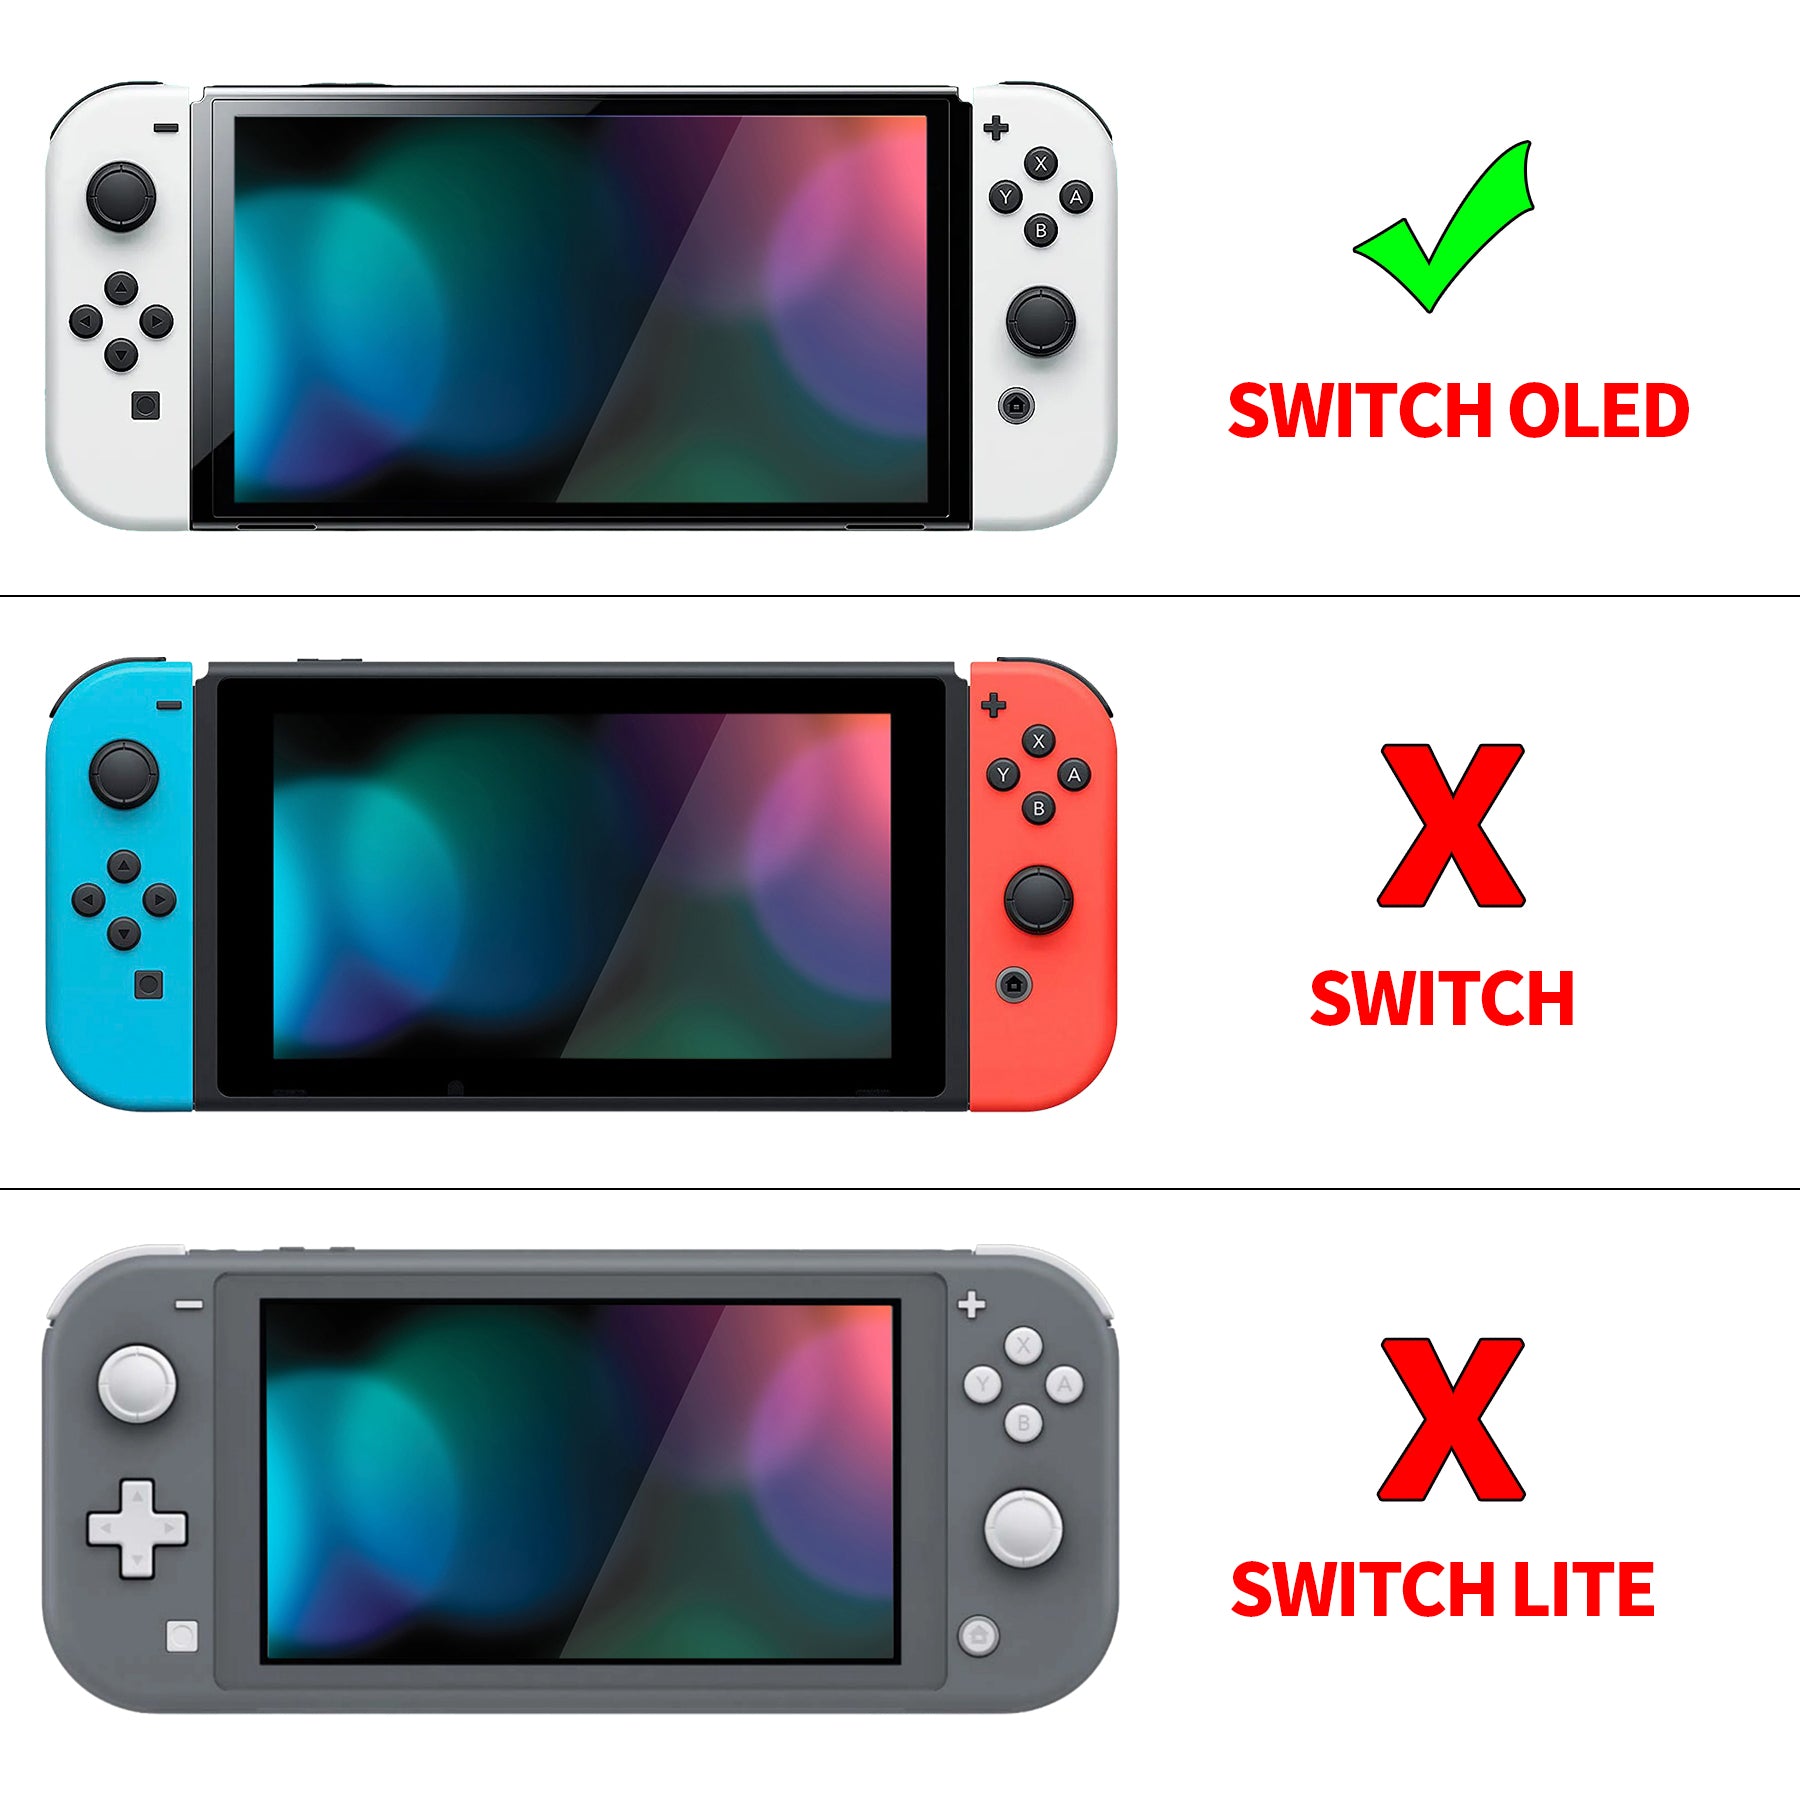 PlayVital ZealProtect Soft Protective Case for Switch OLED, Flexible Protector Joycon Grip Cover for Switch OLED with Thumb Grip Caps & ABXY Direction Button Caps - XSOYV6032 - XSOYV6032 playvital